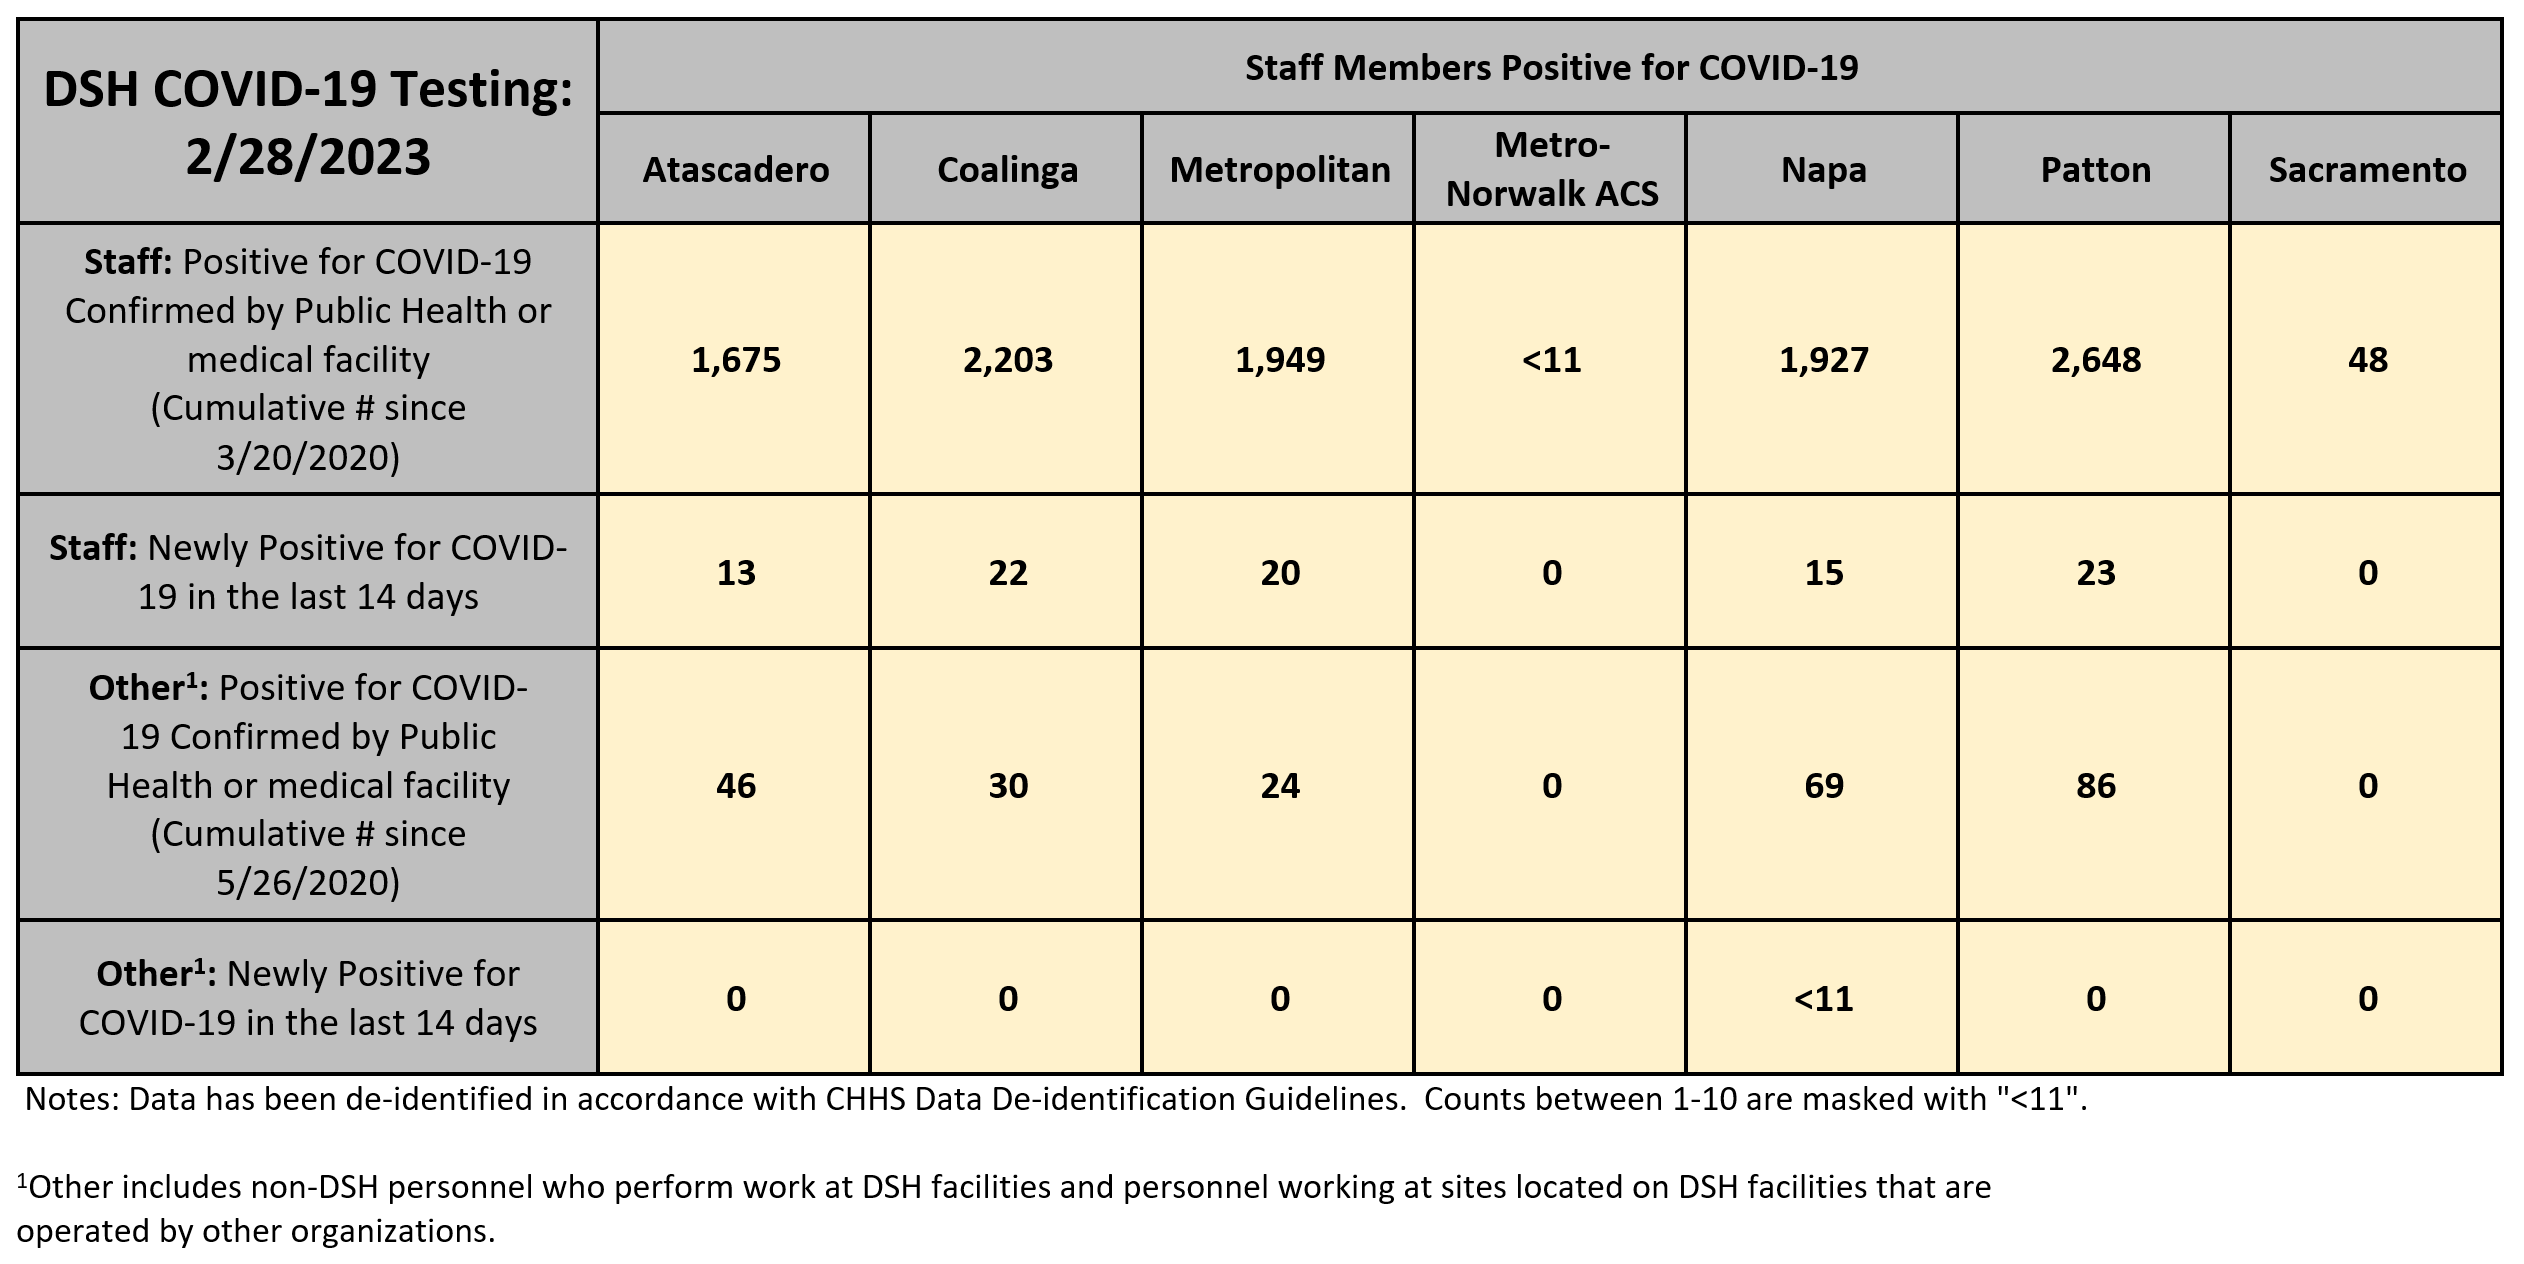 DSH COVID-19 Testing: As of 2/28/2023  Staff Members Positive for COVID-19 - First Row: Staff: Positive for COVID-19 Confirmed by Public Health or medical facility (Cumulative Number since 3/20/2020): Atascadero: 1,675, Coalinga: 2,203, Metropolitan: 1,949, Metro-Norwalk ACS: Less than 11, Napa: 1,927, Patton: 2,648, Sacramento: 48  Next Row: Staff: Newly Positive for COVID-19 in the last 14 days: Atascadero: 13, Coalinga: 22, Metropolitan: 20, Metro-Norwalk ACS: 0, Napa: 15, Patton: 23, Sacramento: 0  Next Row: Other: Positive for COVID-19 Confirmed by Public Health or medical facility (Cumulative Number since 5/26/2020)(Other includes non-DSH personnel who perform work at DSH facilities and personnel working at sites located on DSH facilities that are operated by other organizations). Atascadero: 46, Coalinga: 30, Metropolitan: 24, Metro-Norwalk ACS: 0, Napa: 69, Patton: 86, Sacramento: 0  Next Row: Other: Newly Positive for COVID-19 in the last 14 days: Atascadero: 0, Coalinga: 0, Metropolitan: 0, Metro-Norwalk ACS: 0, Napa: Less than 11, Patton: 0, Sacramento: 0